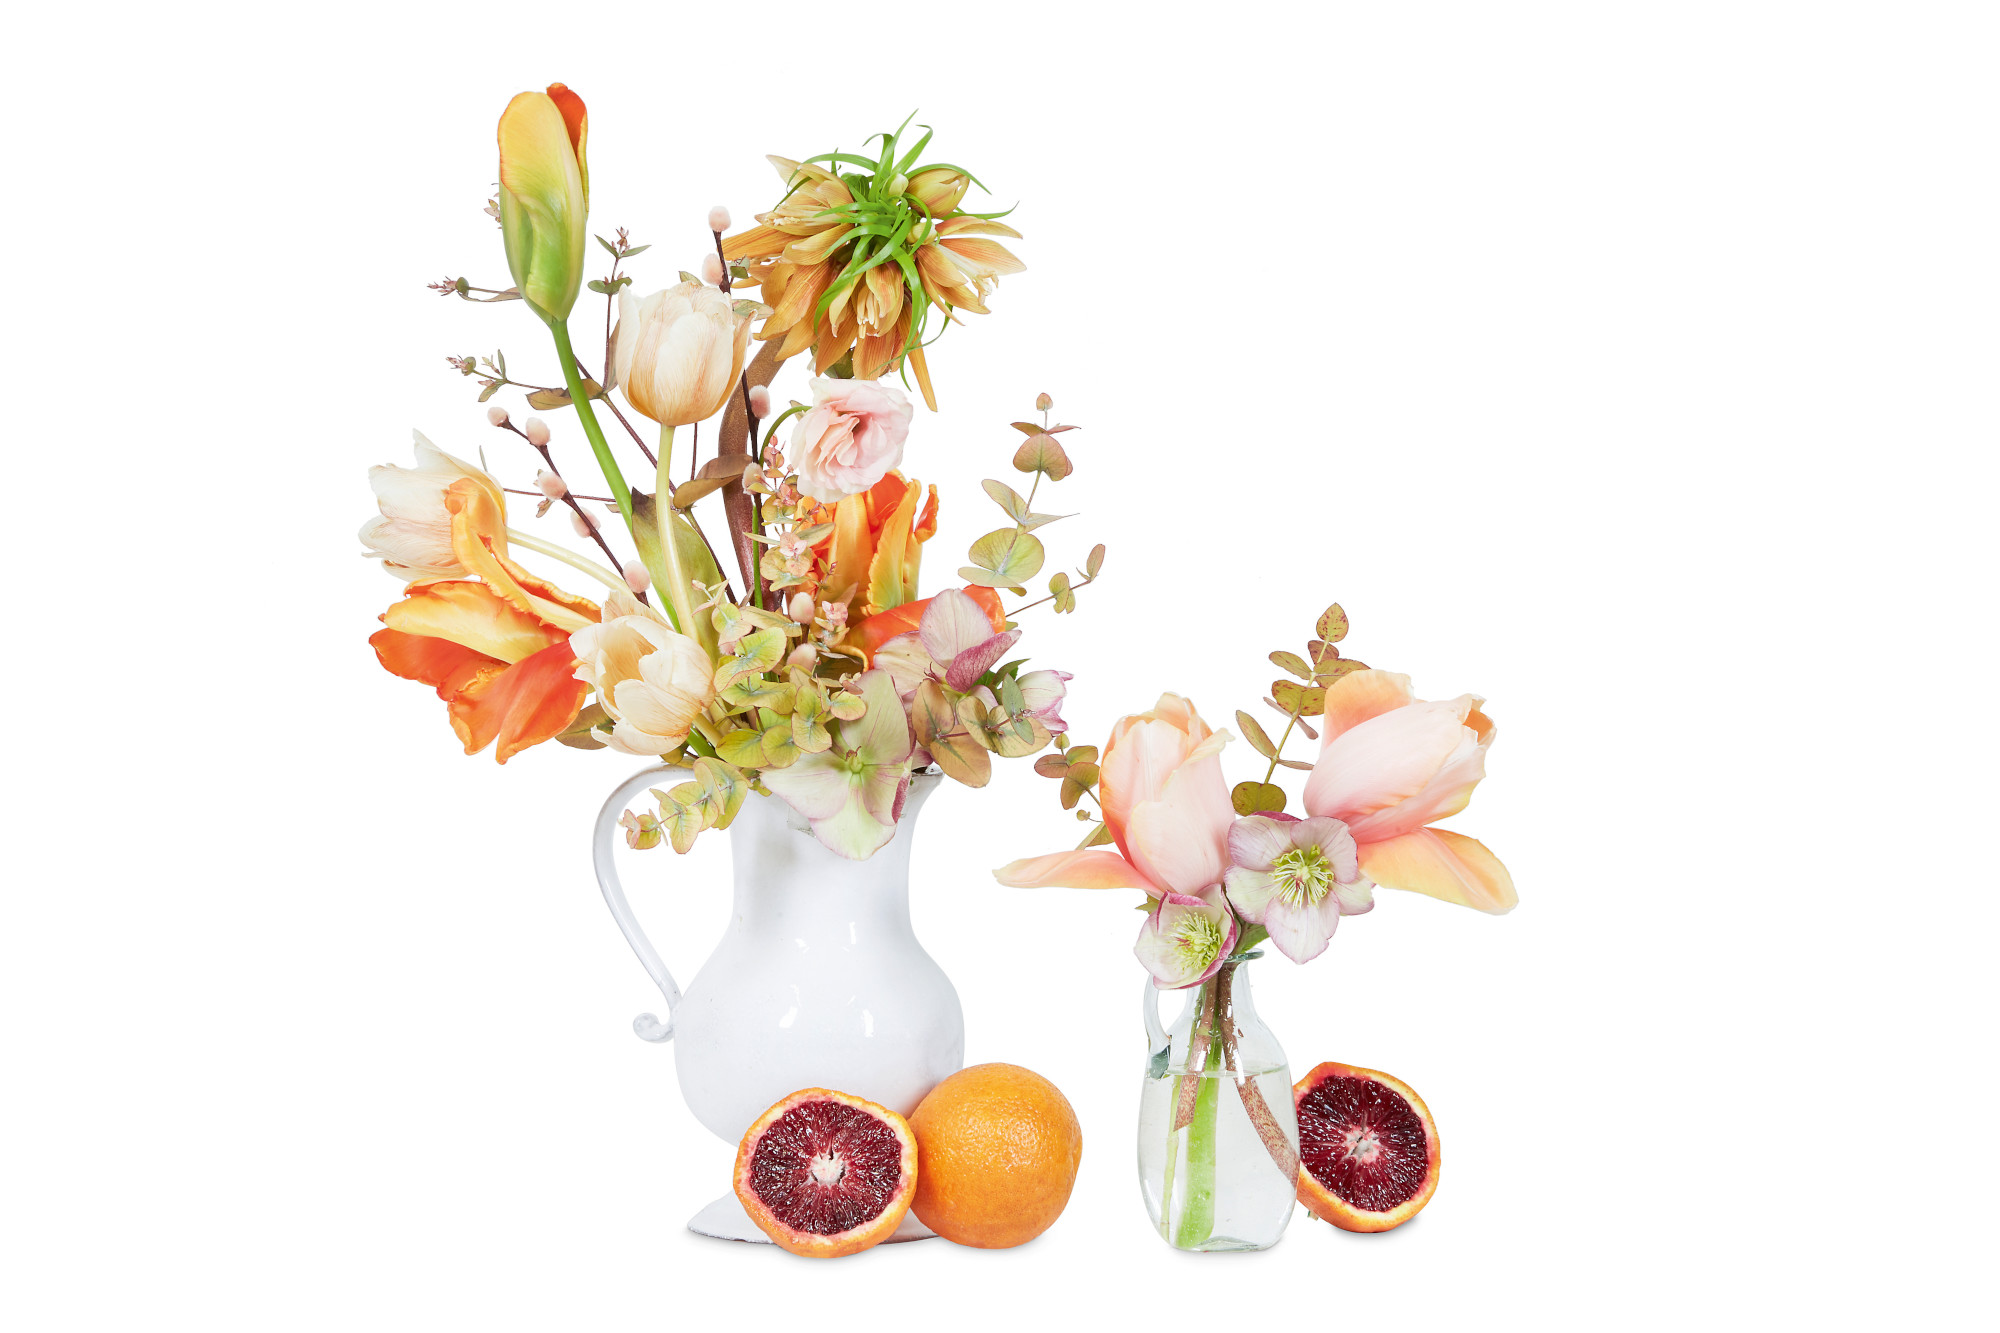 Accent Color: Orange, brown, and peach with burgundy accent. Crown imperial fritillary, Tulip, Blood orange, Ranunculus, Eucalyptus, Pussy willow. Employing vessels made of different materials, like glass and ceramic here, adds texture to a composition